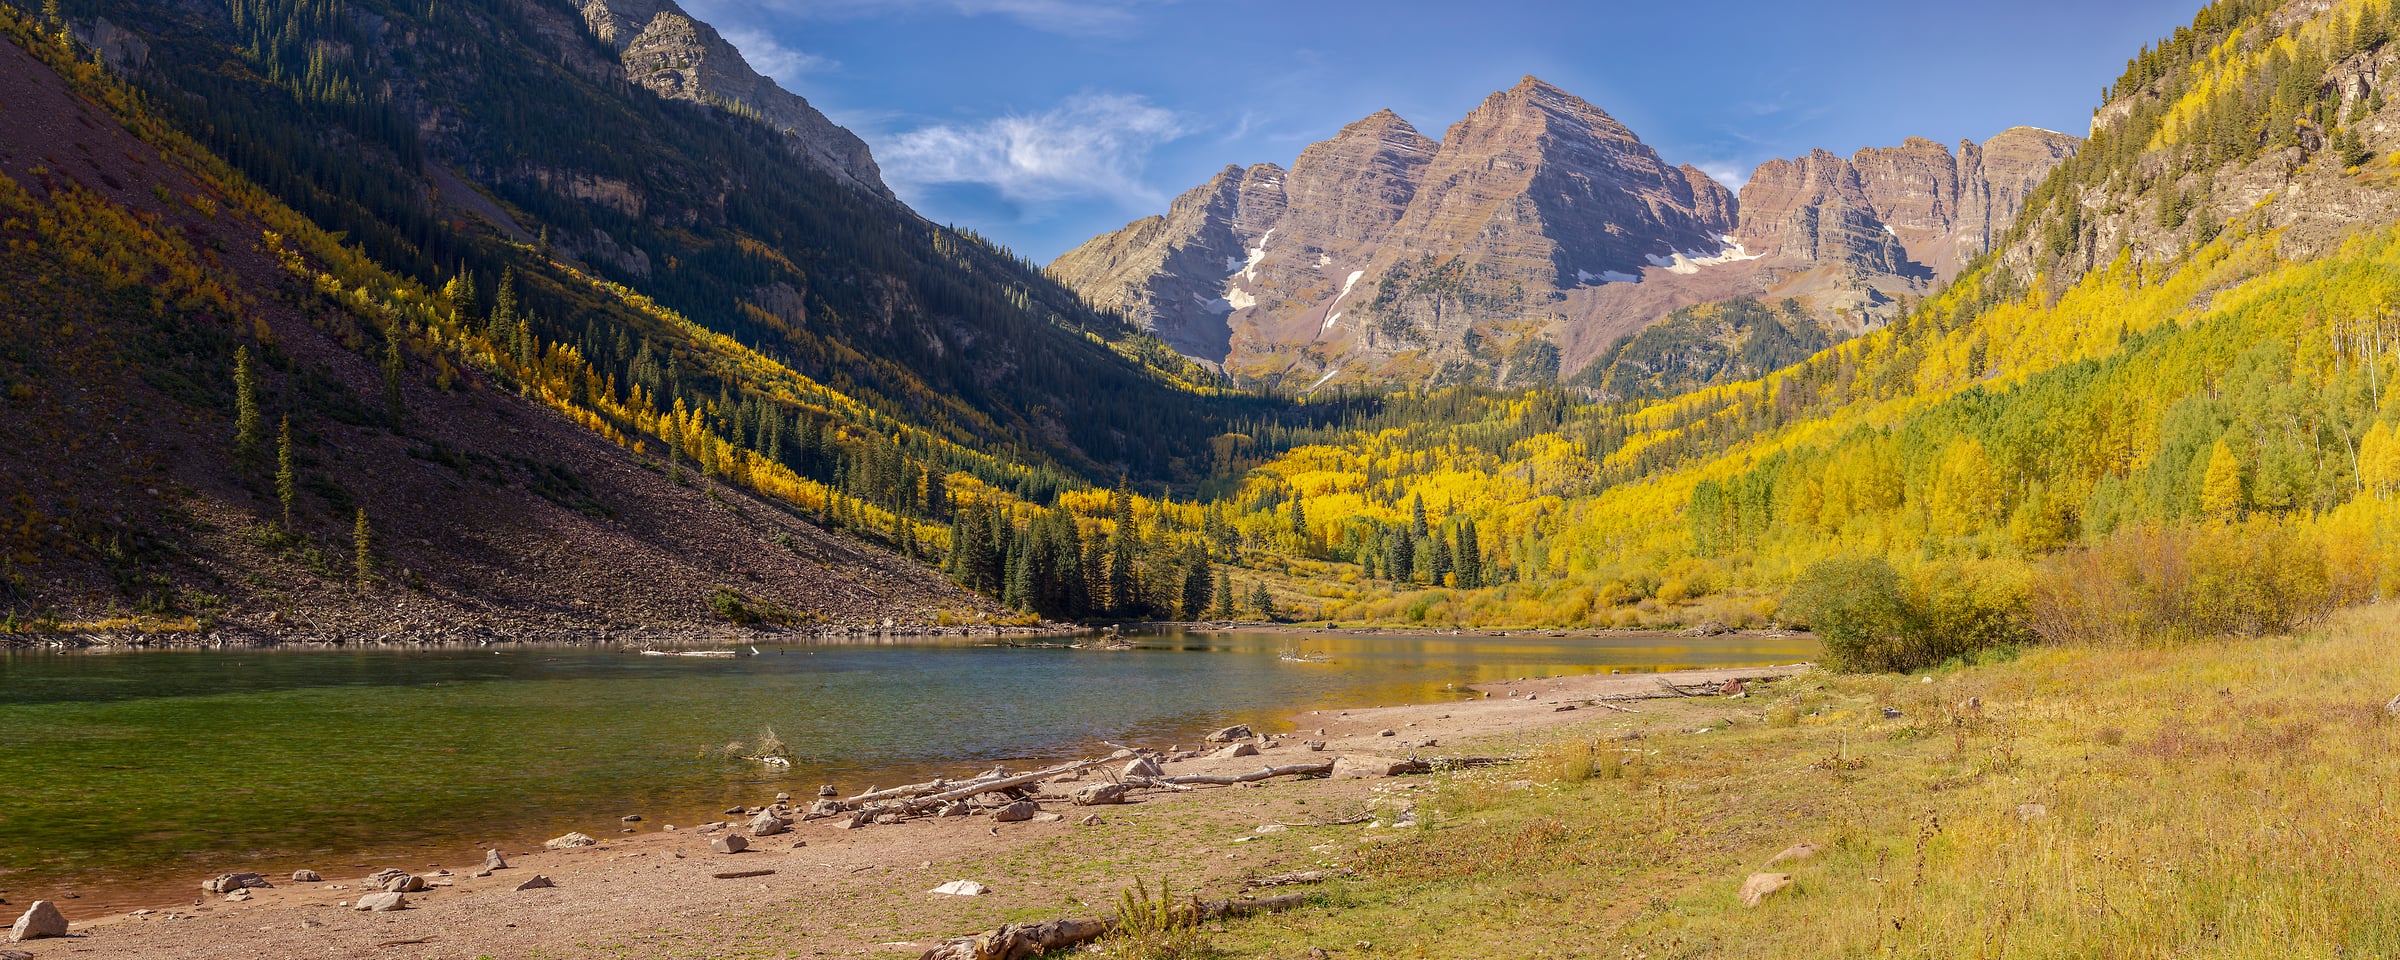 3,244 megapixels! A very high resolution, large-format VAST photo print of a mountain landscape in Aspen, Colorado; photograph created by John Freeman in Maroon Lake, Aspen, Colorado.